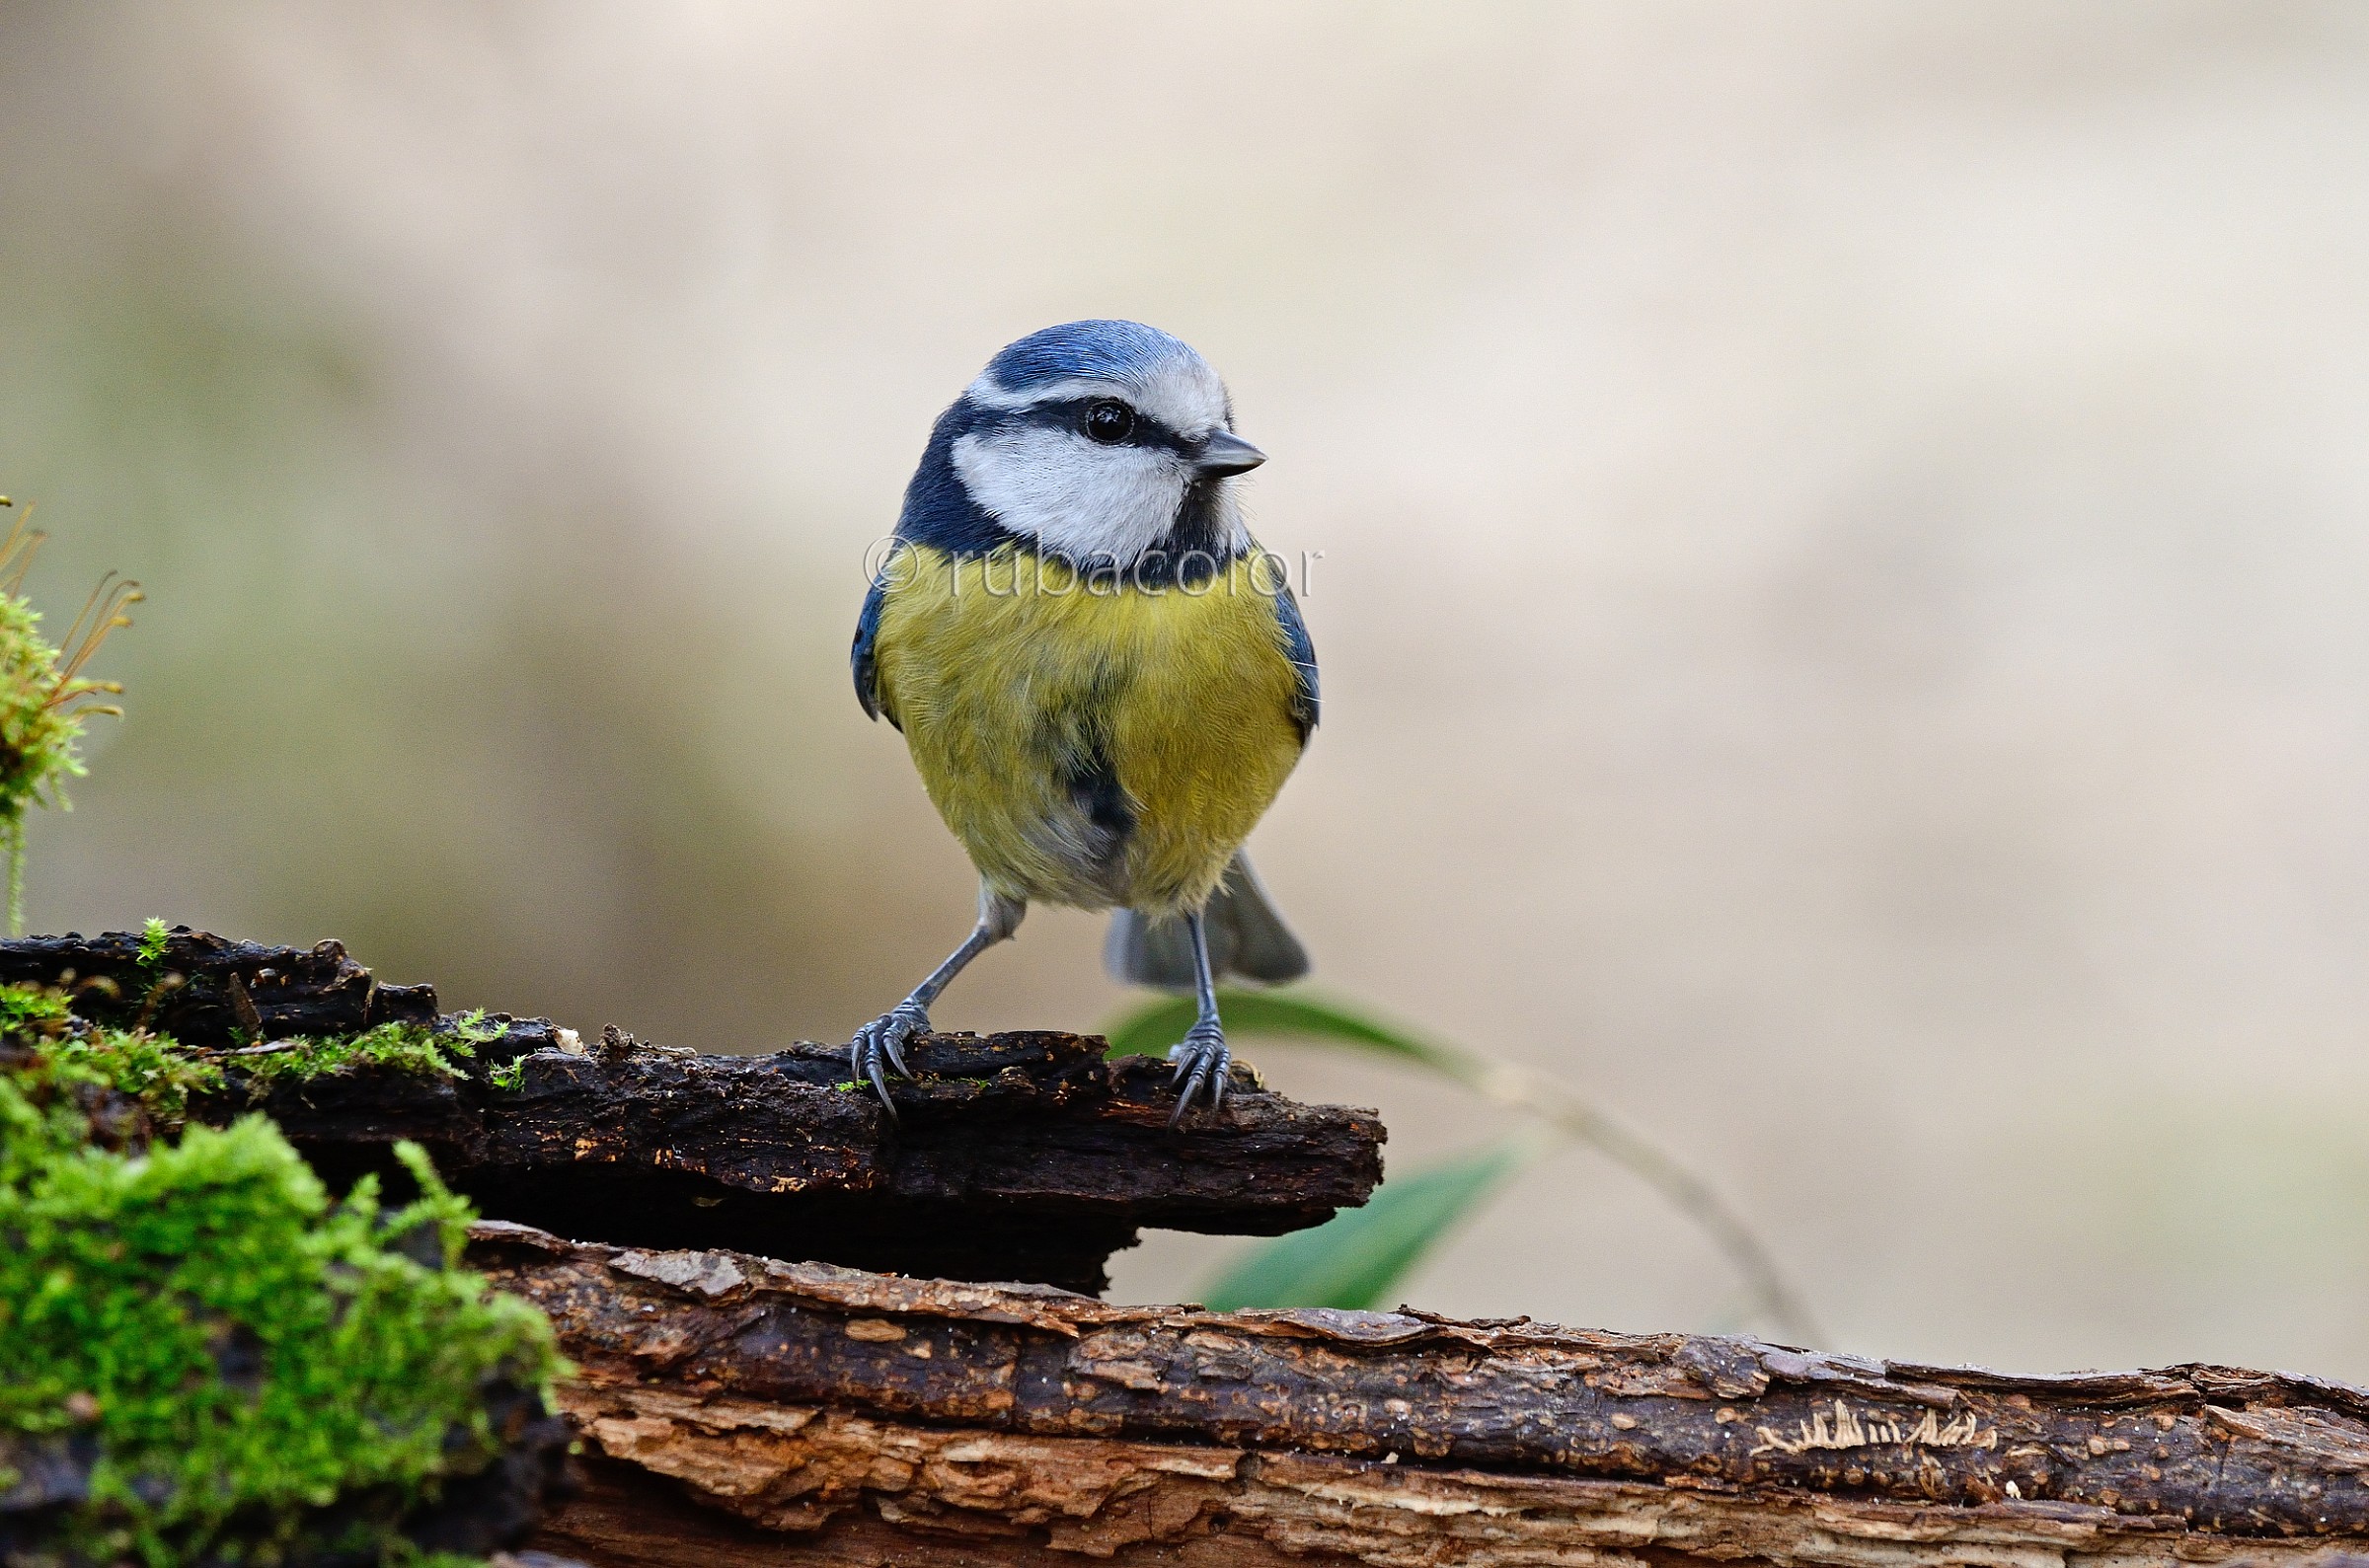 About the blue tit...